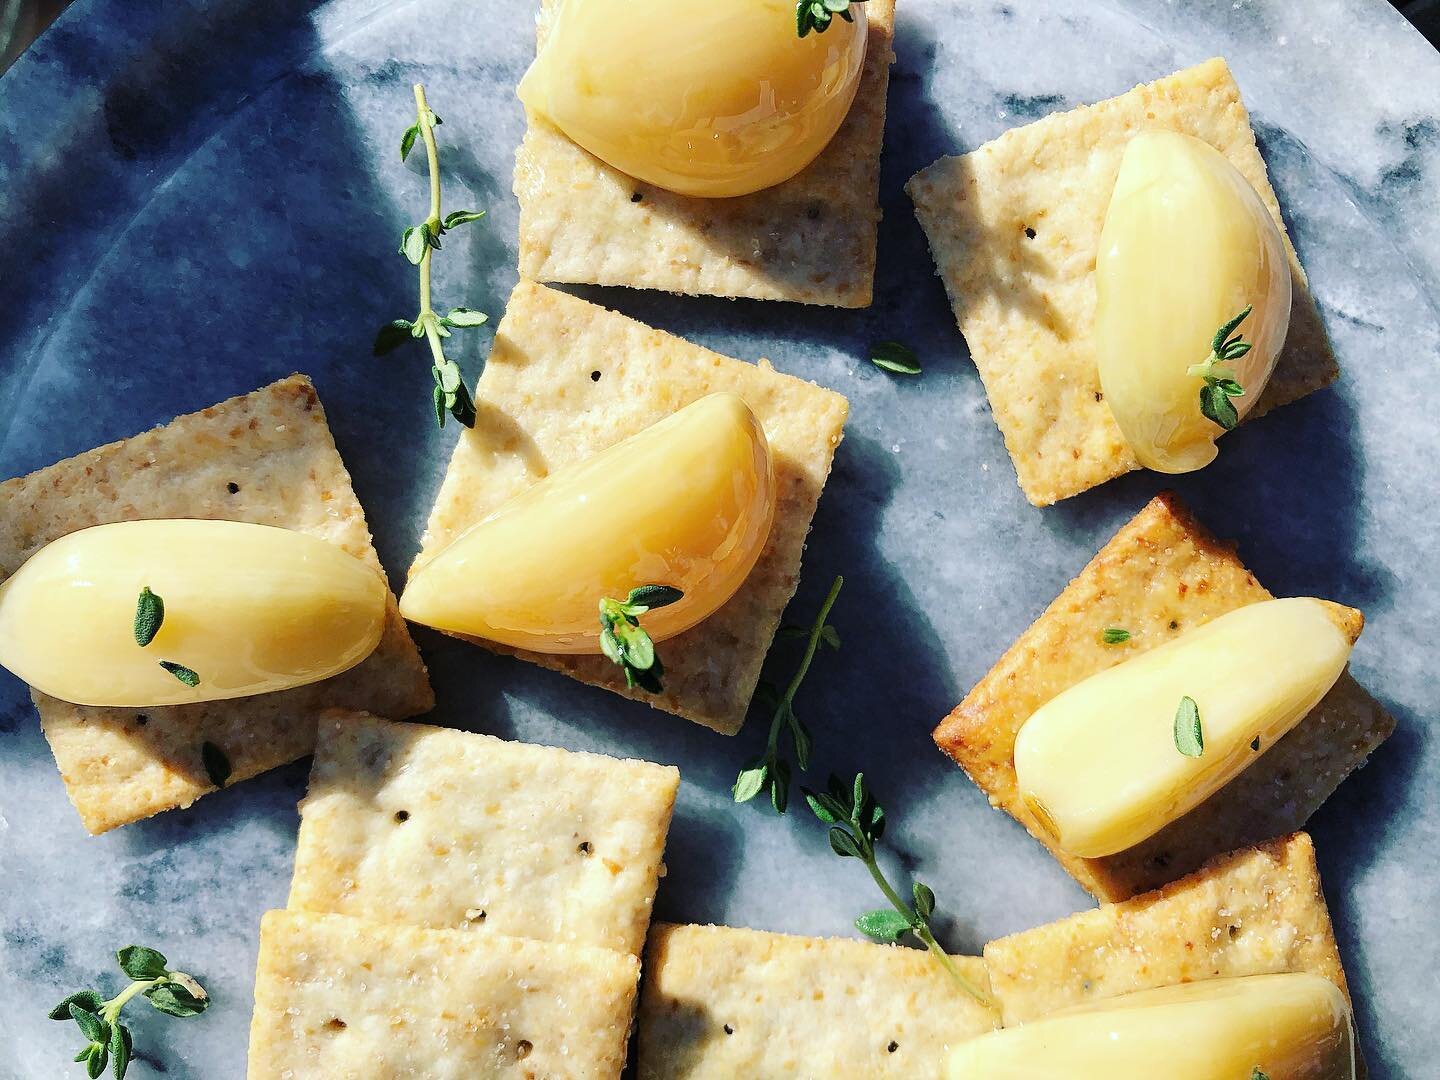 Little afternoon snack today with our senior group at the Plaza point apartments. 🏰
Garlic confit 
Thyme 🌿
@simplemills cracker 

GARLIC CONFIT RECIPE 
1.Place pealed garlic cloves in an oven-safe saucepan. 
2.cover with @henrysolives oil or grape 